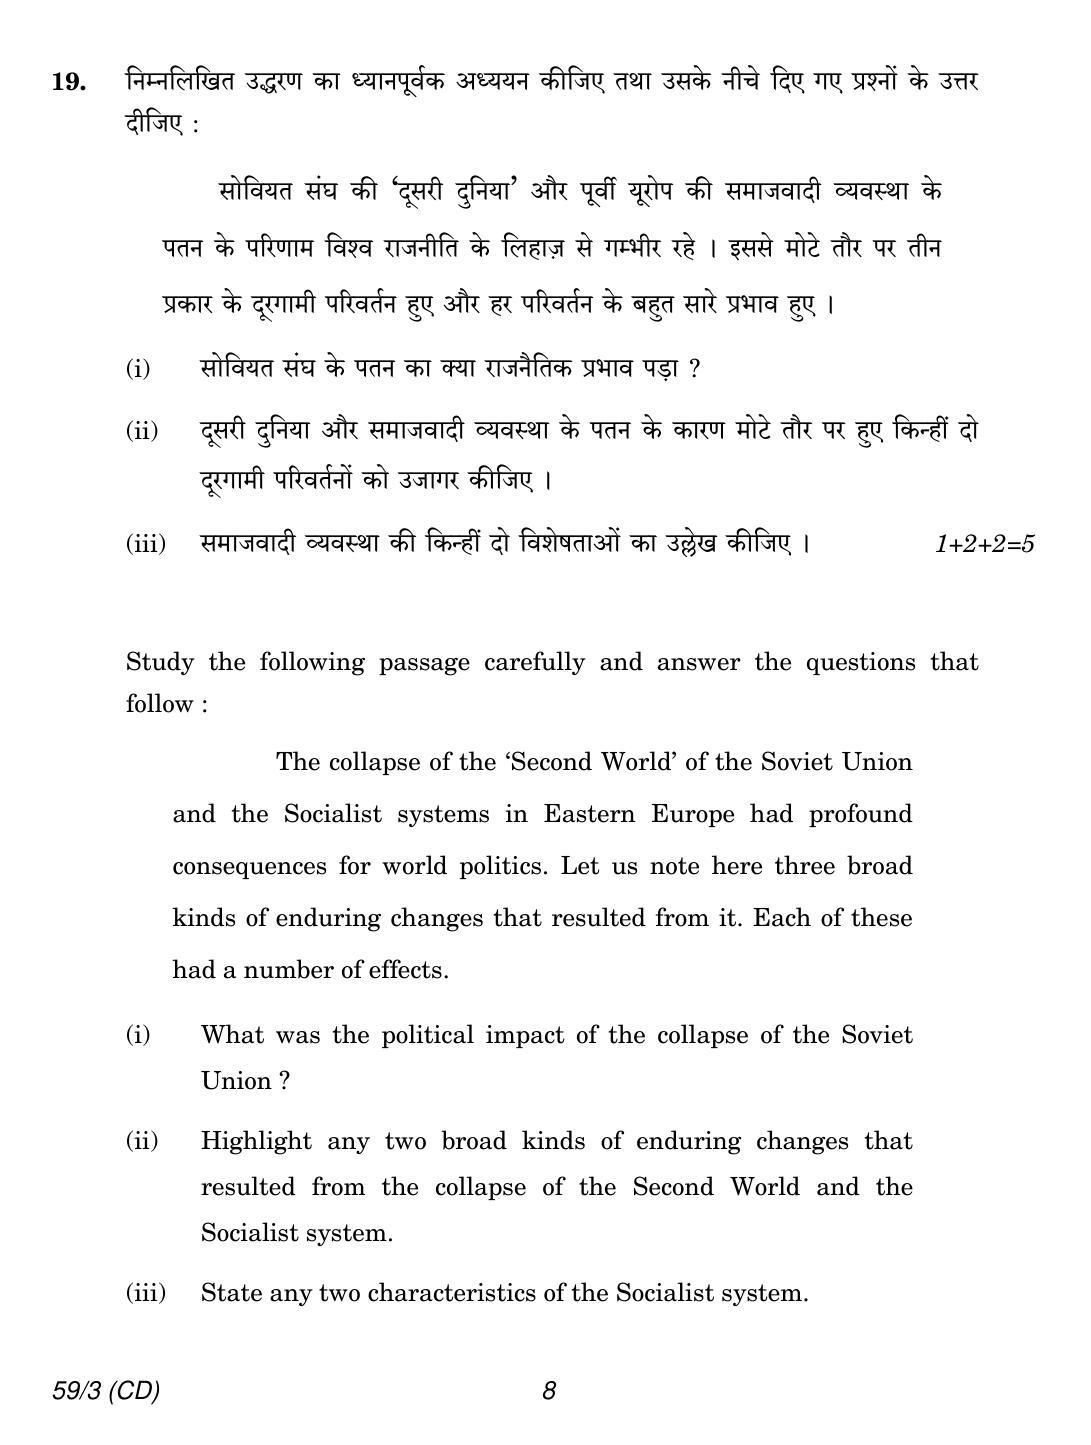 CBSE Class 12 59-3 POLITICAL SCIENCE CD 2018 Question Paper - Page 8